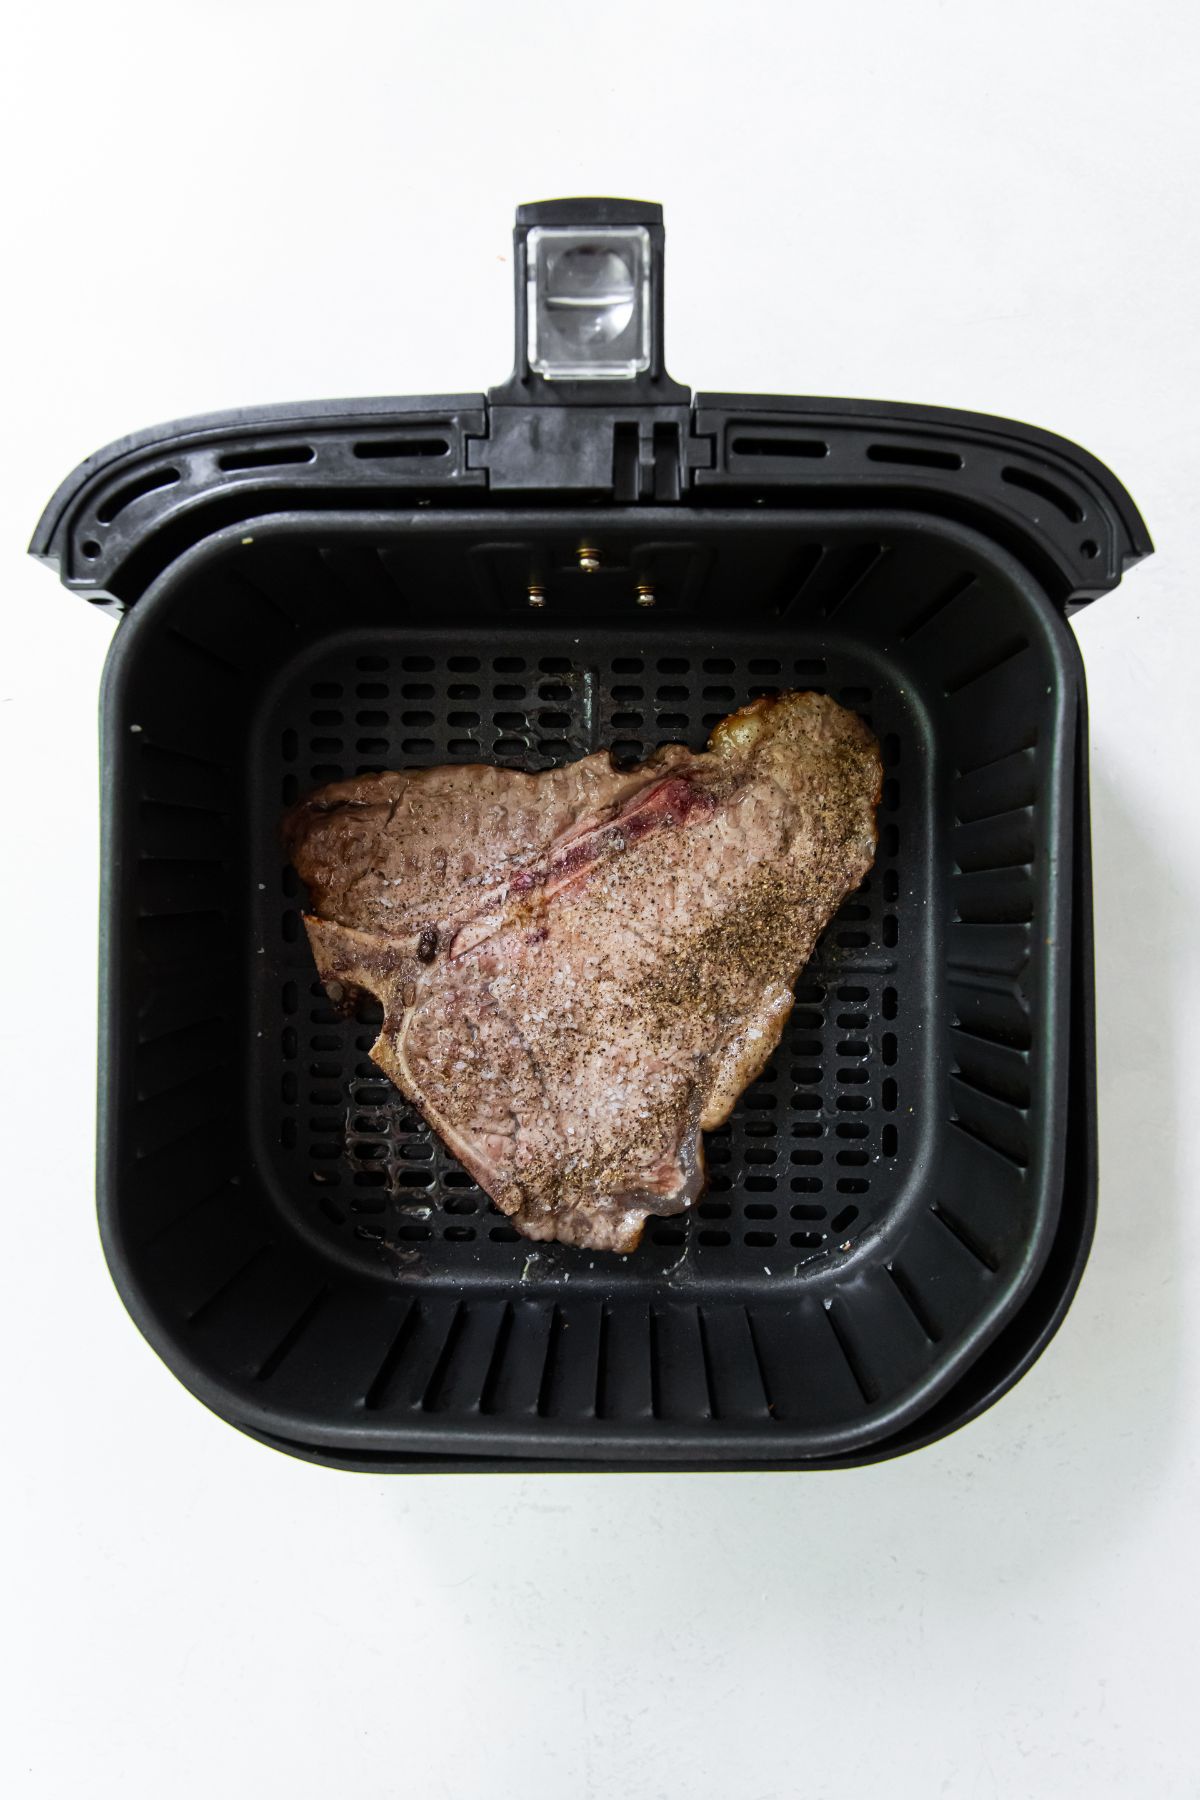 black air fryer with cooked steak inside